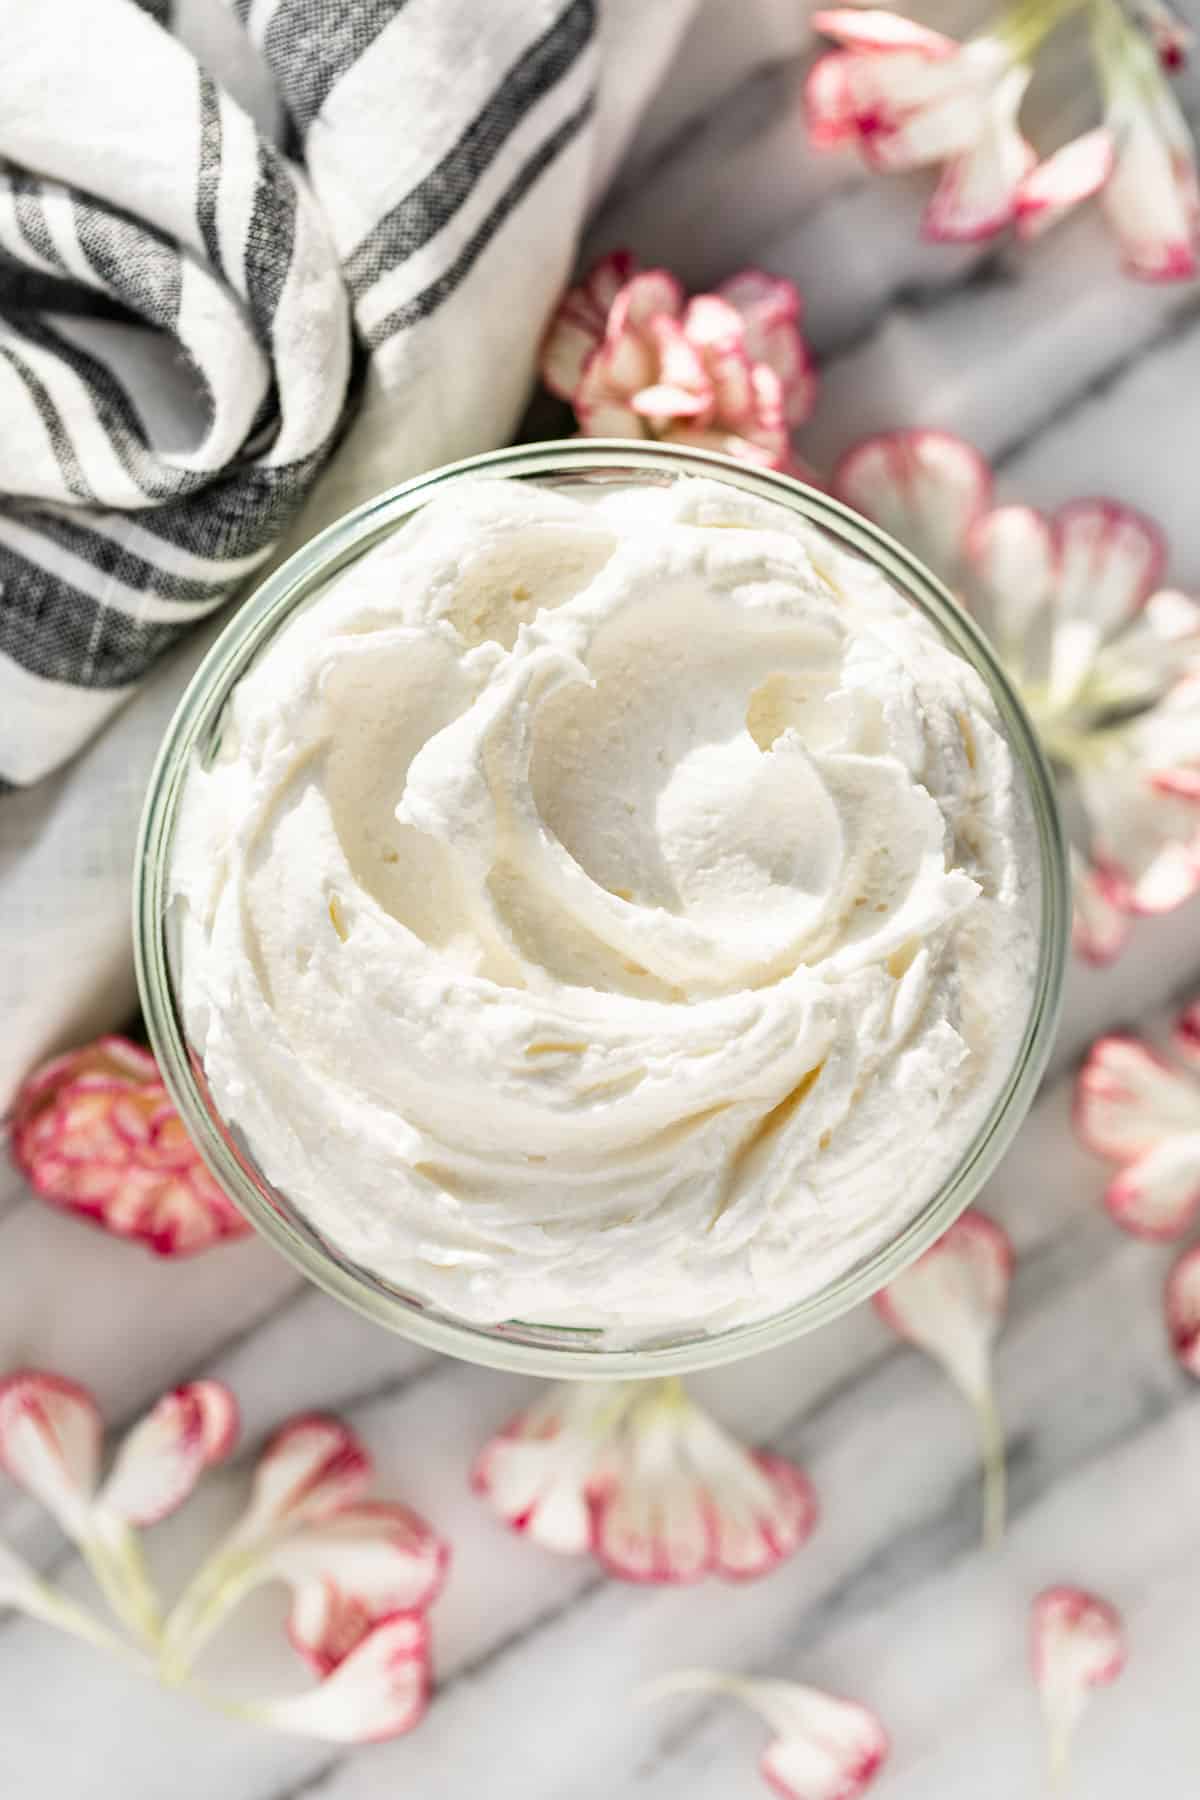 Straight down view of Whipped Body Butter in a glass jar with pink and white flower petals surrounding it.